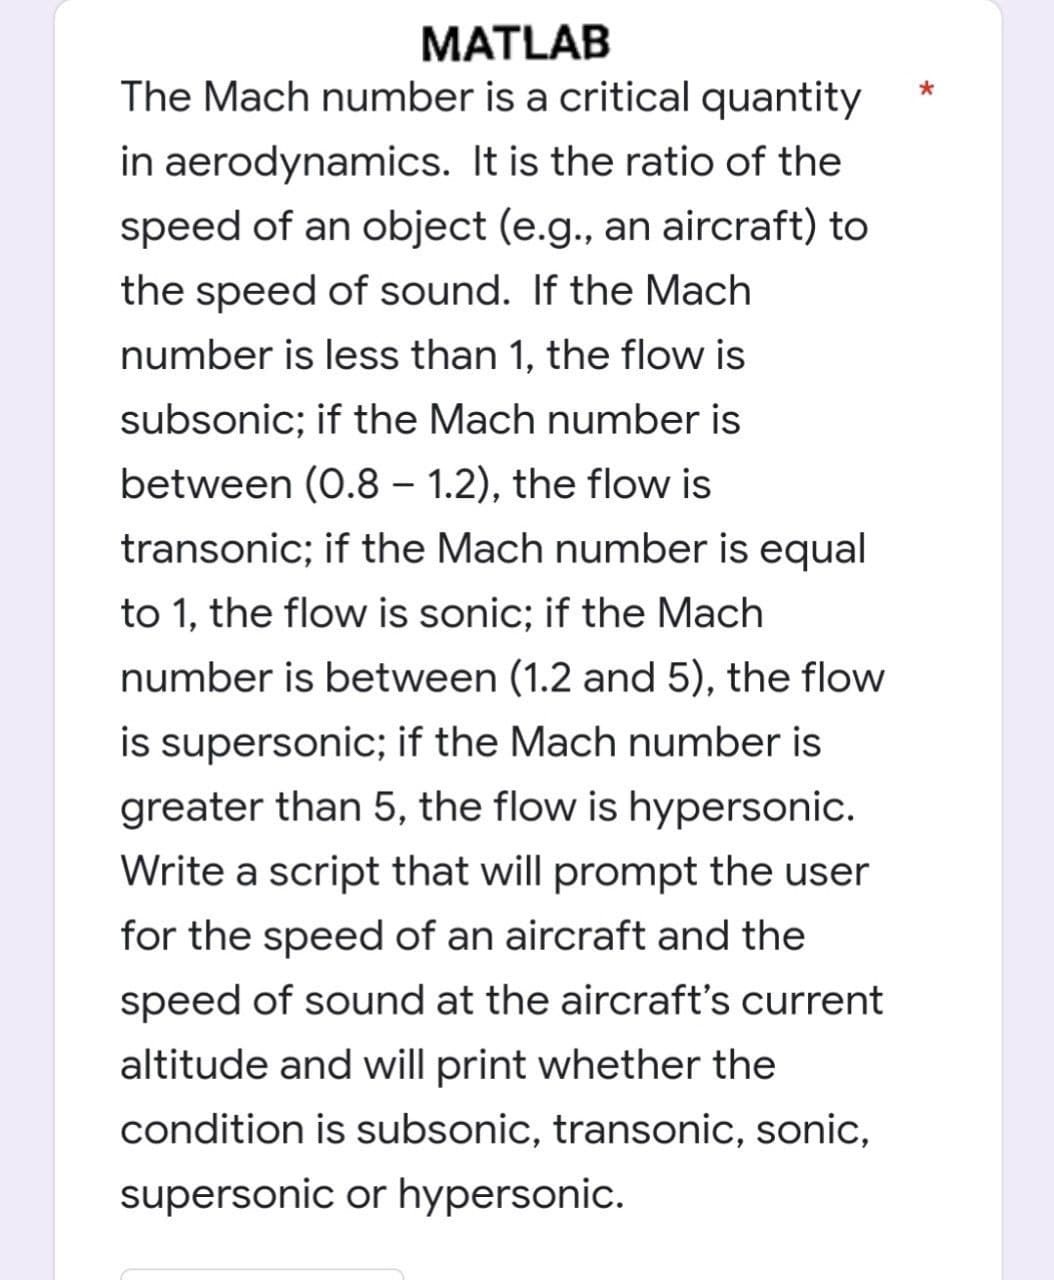 MATLAB
The Mach number is a critical quantity
in aerodynamics. It is the ratio of the
speed of an object (e.g., an aircraft) to
the speed of sound. If the Mach
number is less than 1, the flow is
subsonic; if the Mach number is
between (0.8-1.2), the flow is
transonic; if the Mach number is equal
to 1, the flow is sonic; if the Mach
number is between (1.2 and 5), the flow
is supersonic; if the Mach number is
greater than 5, the flow is hypersonic.
Write a script that will prompt the user
for the speed of an aircraft and the
speed of sound at the aircraft's current
altitude and will print whether the
condition is subsonic, transonic, sonic,
supersonic or hypersonic.